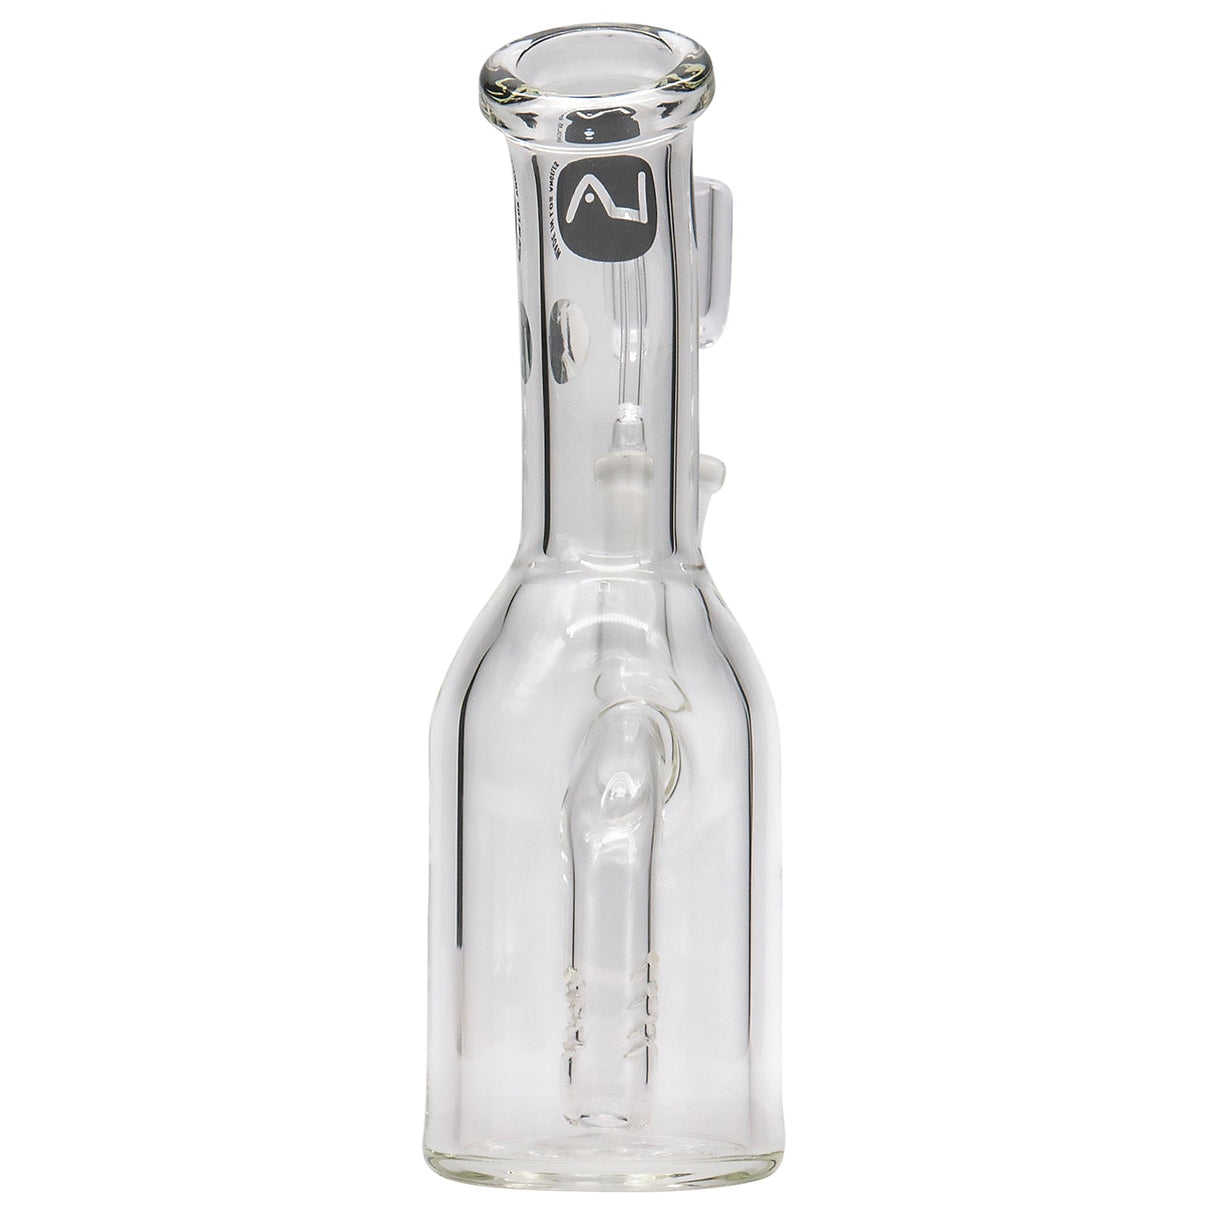 LA Pipes Compact Bent Neck Concentrate Waterpipe, 6" Borosilicate Glass, 90 Degree Joint